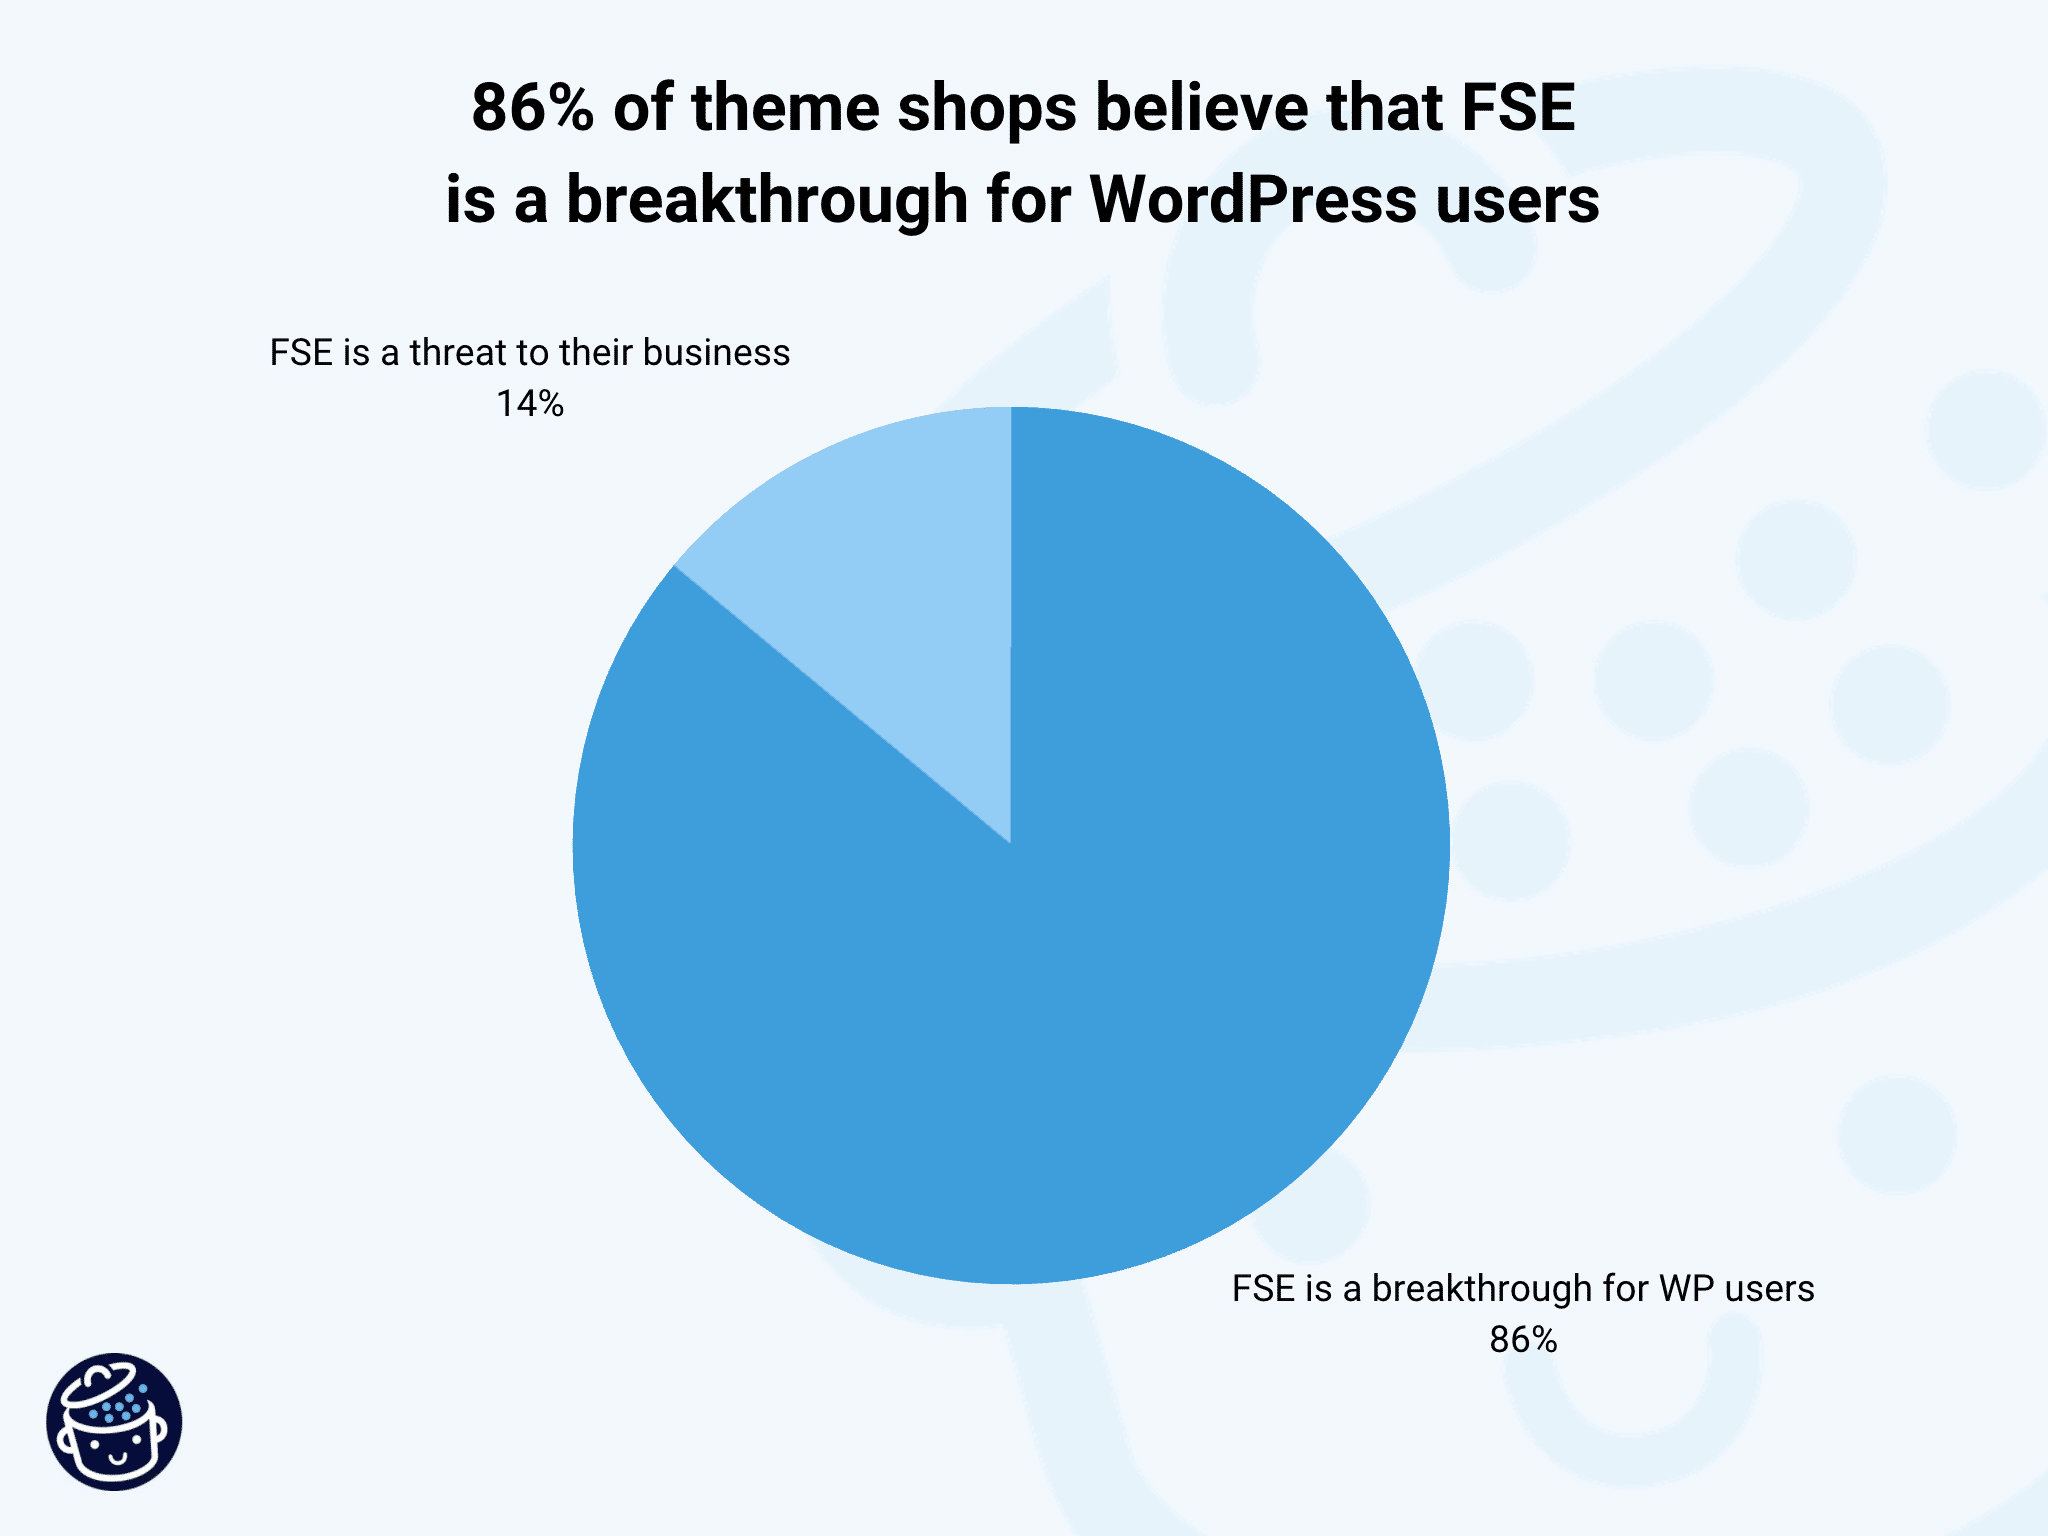 Theme shops thinking FSE is a breakthrough for WordPress users.